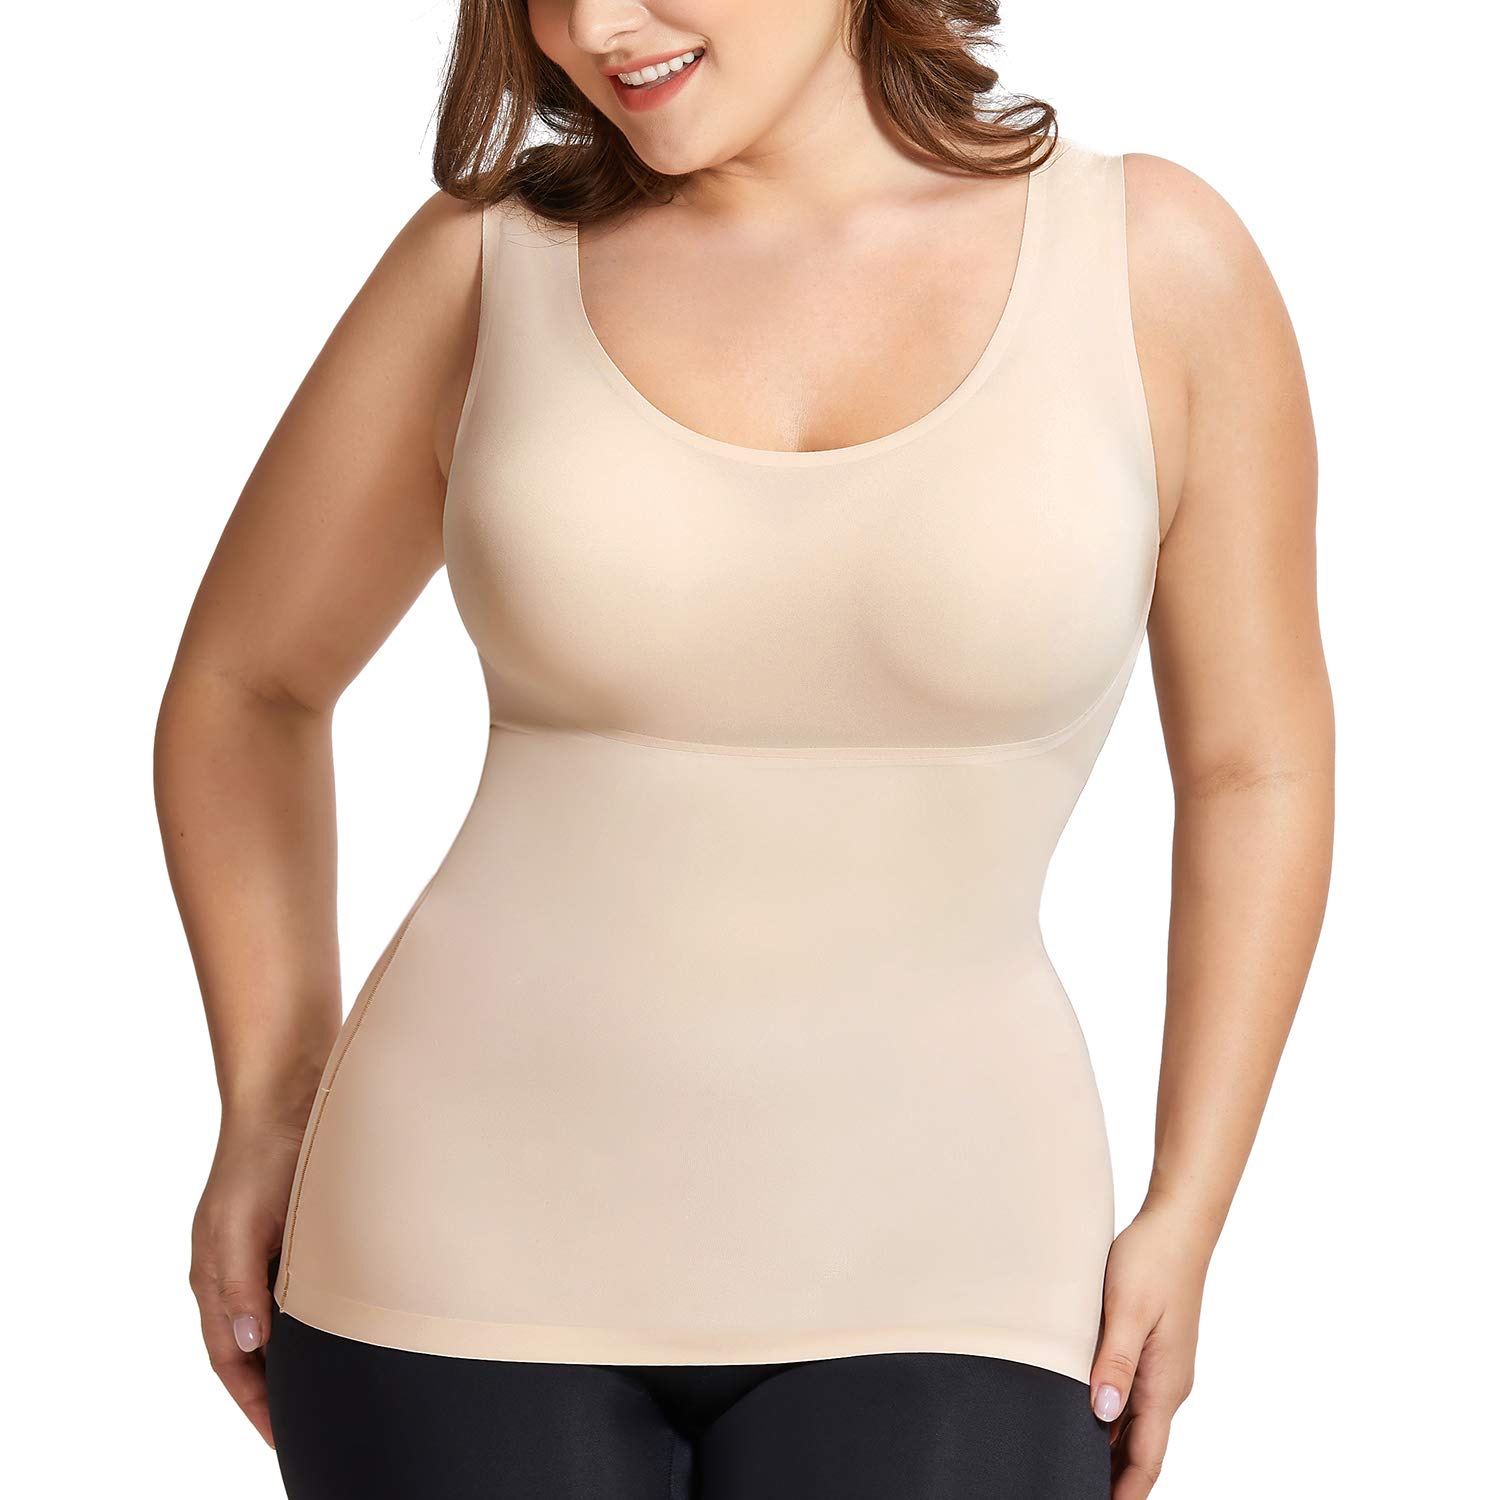 Scoop Neck Tank Tops for Women Tummy Control Shapewear Camisole Compression Slimming Cami Shaper Top 